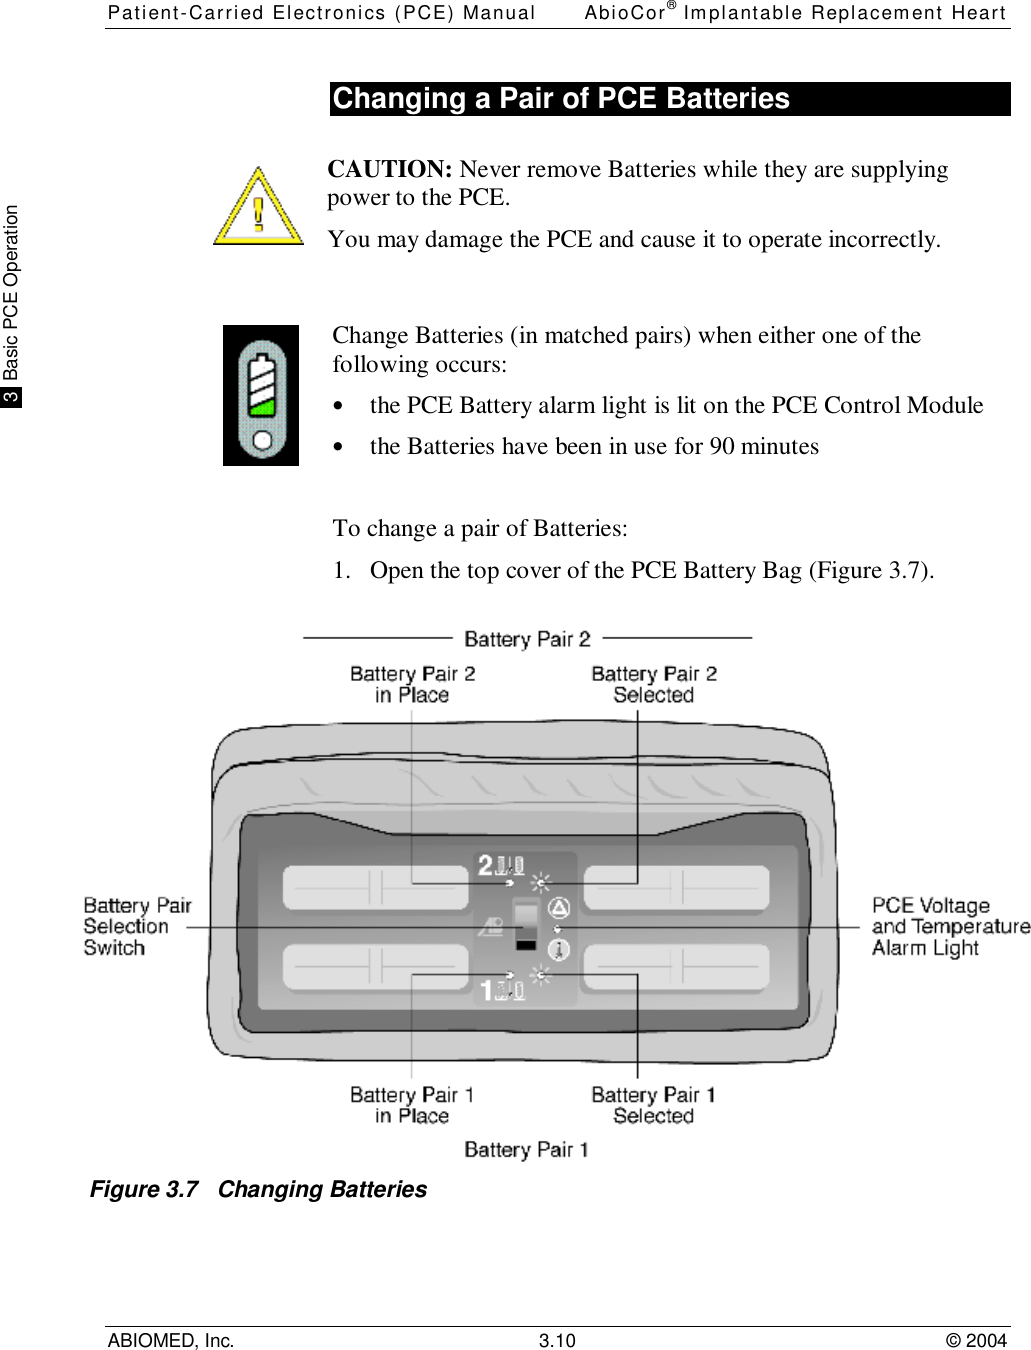 Patient-Carried Electronics (PCE) Manual AbioCor® Implantable Replacement HeartABIOMED, Inc. 3.10 © 2004 3  Basic PCE OperationChanging a Pair of PCE BatteriesCAUTION: Never remove Batteries while they are supplyingpower to the PCE.You may damage the PCE and cause it to operate incorrectly.Change Batteries (in matched pairs) when either one of thefollowing occurs:• the PCE Battery alarm light is lit on the PCE Control Module• the Batteries have been in use for 90 minutesTo change a pair of Batteries:1. Open the top cover of the PCE Battery Bag (Figure 3.7).Figure 3.7   Changing Batteries